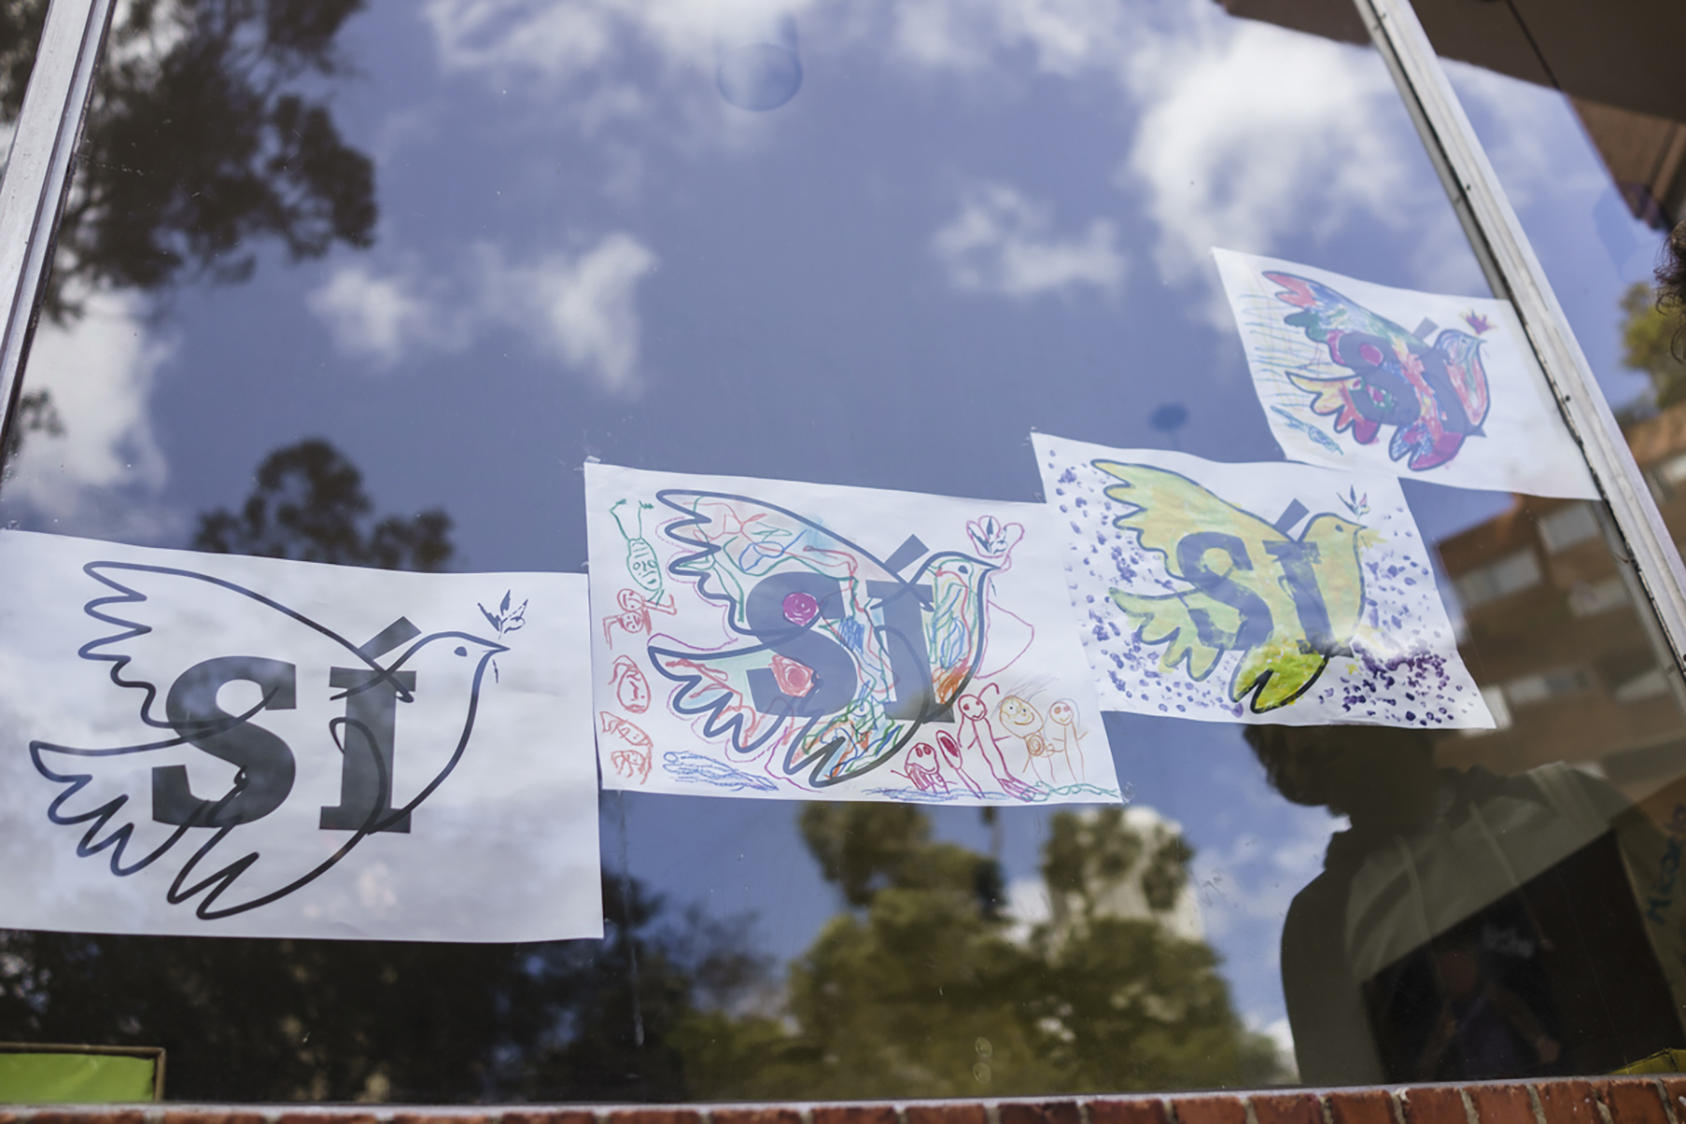 Artwork of doves with the Spanish word for "yes," urging support for a coming referendum, in the window of a kindergarten on the day of the signing of a peace agreement between the Colombian government and the Revolutionary Armed Forces of Colombia, or FARC, in Bogota, Sept. 26, 2016. In a moment that generations of Colombians yearned to see, the state and Marxist insurgents confirmed an accord to end a 52-year-old conflict, the last major war in the Americas. (Federico Rios Escobar/The New York Times)